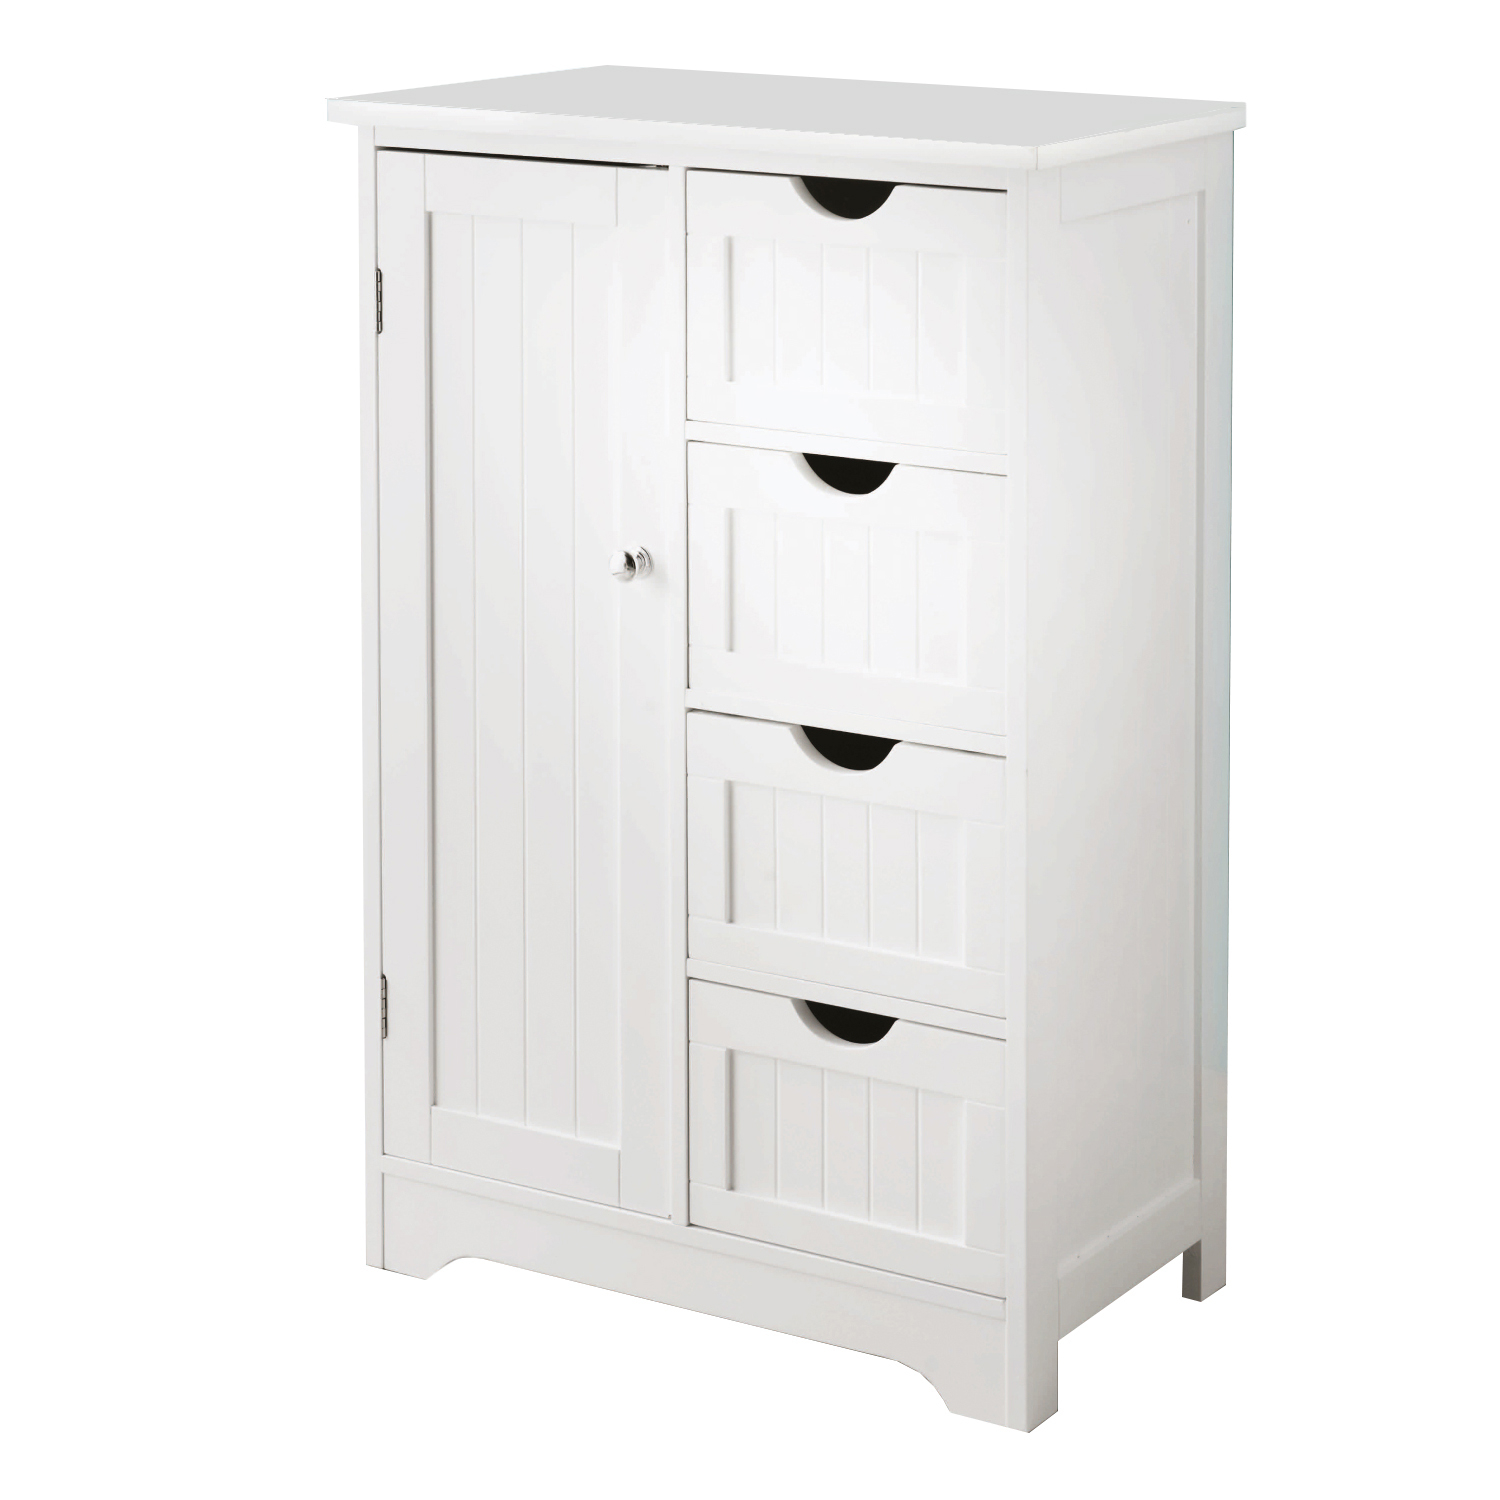 Bathroom Cabinet With 4 Drawersshelves 063141 inside size 1500 X 1500